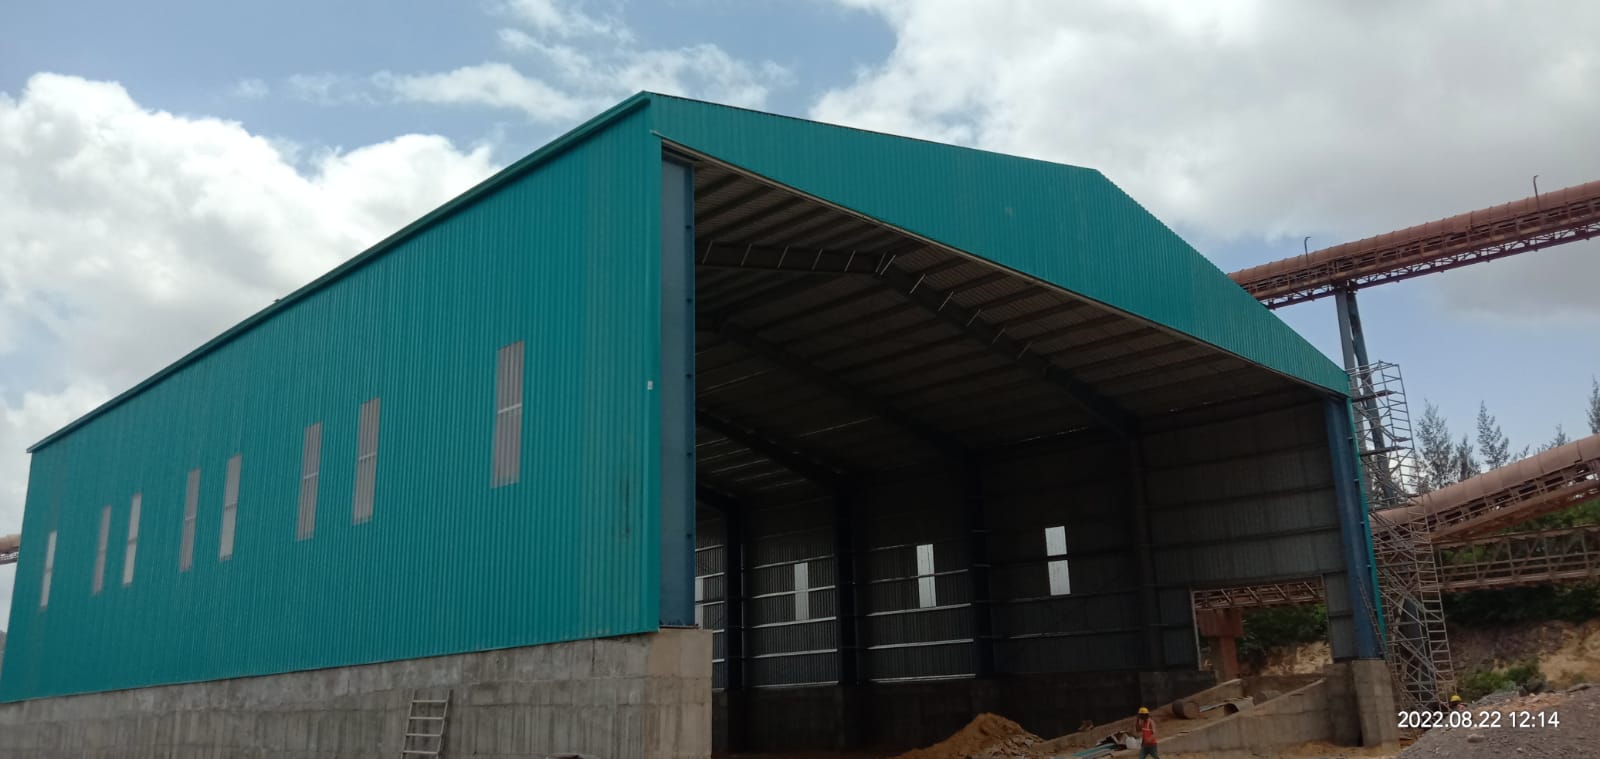 Peb Sheds Manufactures in Hyderabad Contact:9391381436 | SriChakra PEB Structures | Peb Sheds Manufactures in Hyderabad, Sheds Manufactures in  Vijayawada, Peb Sheds Manufactures in Vizag, Peb Sheds Manufactures in Banglore - GL107345